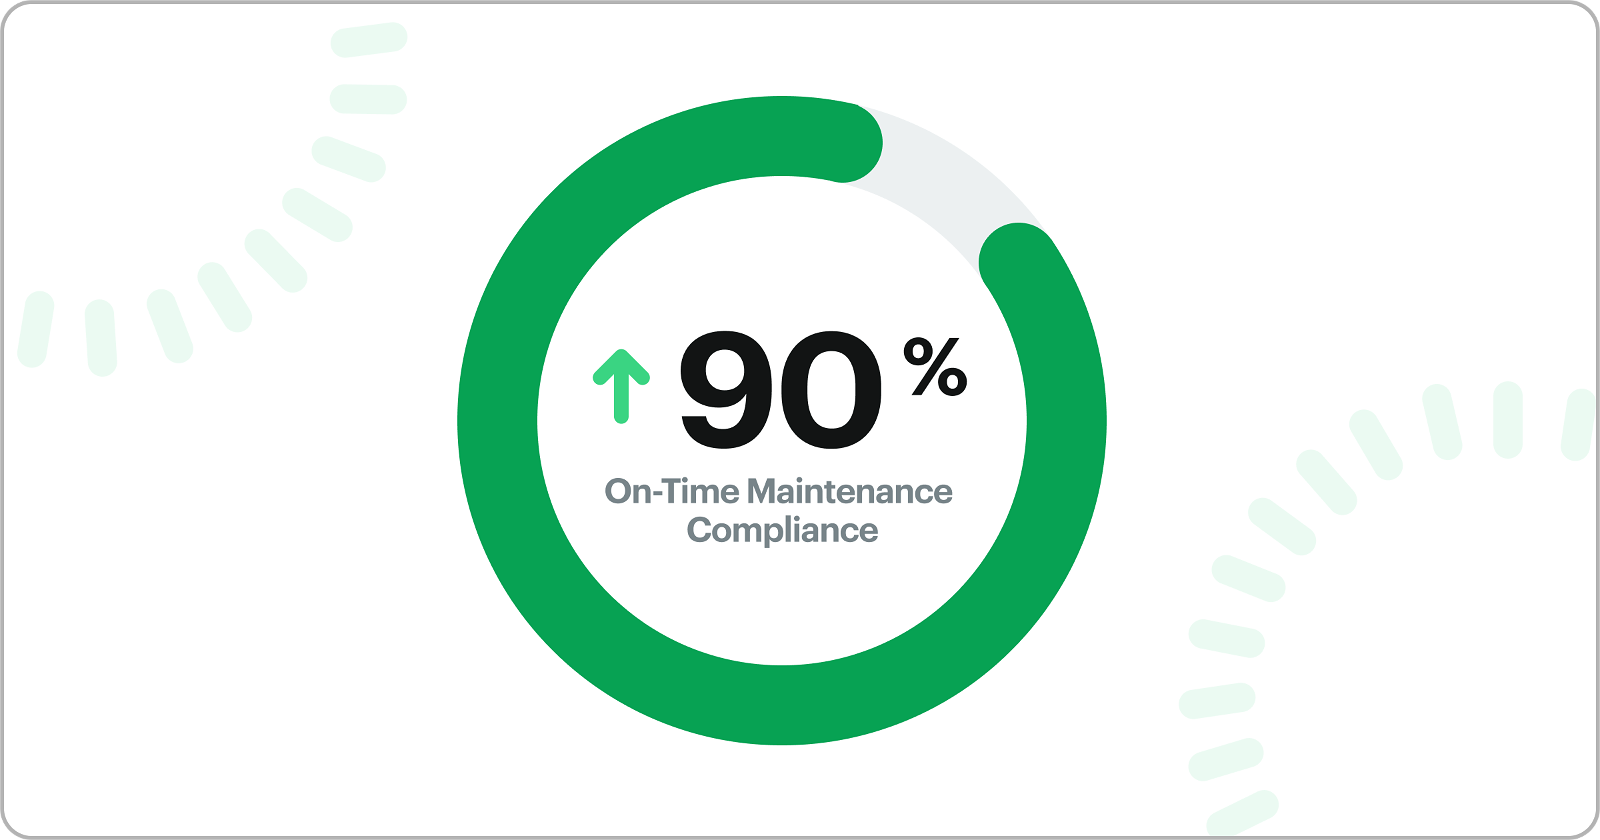 Increased On-Time Maintenance Compliance to 90%